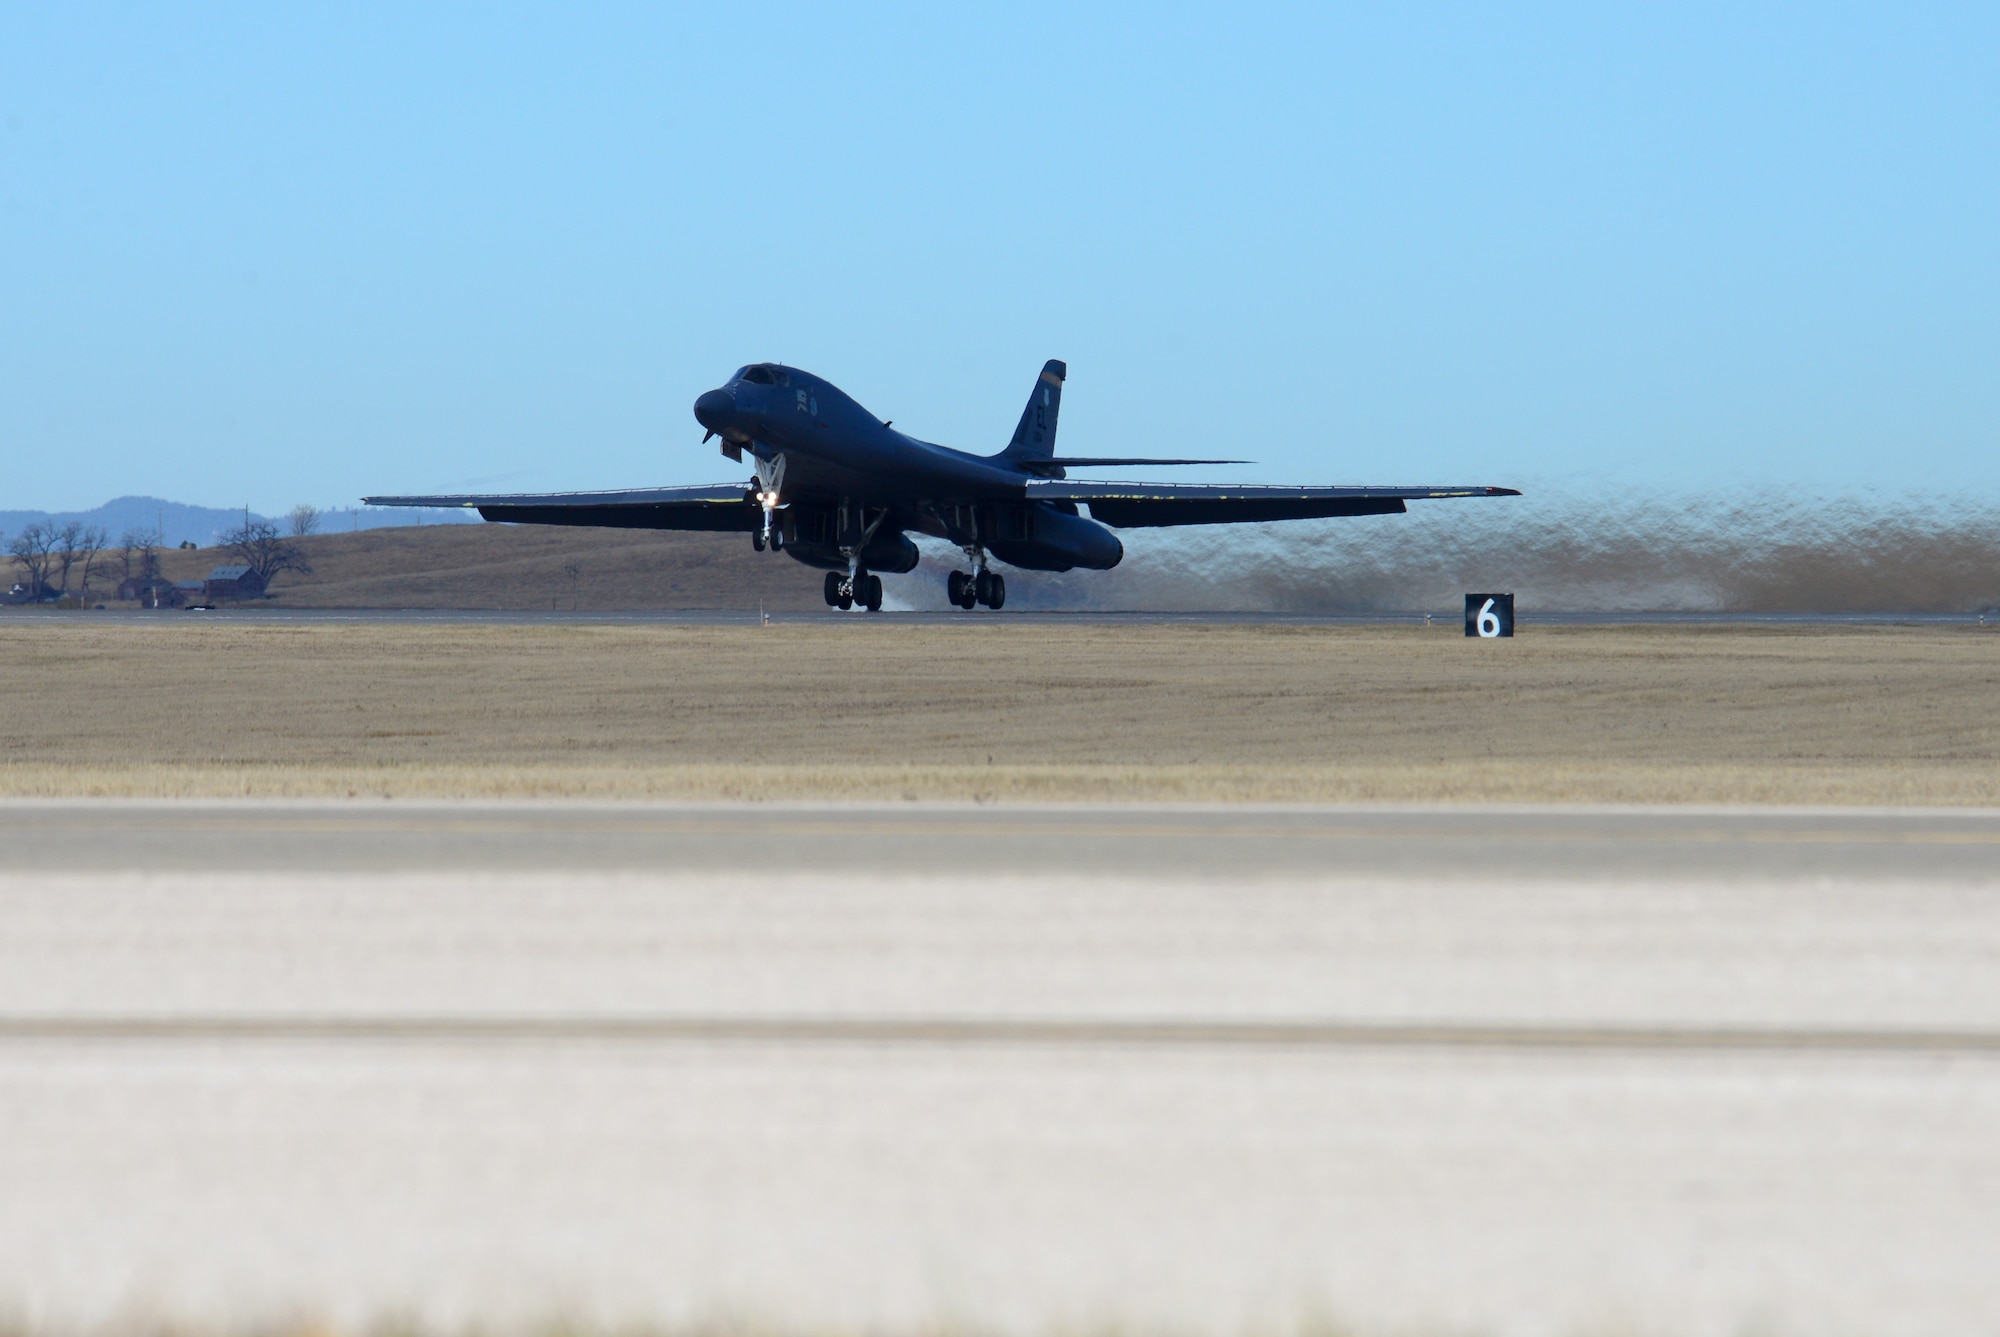 A B-1 assigned to the 37th Bomb Squadron takes off from Ellsworth Air Force Base, S.D., Oct. 24, 2018. Five B-1s and more than 100 Airmen from the 37th BS departed to participate in Green Flag, an air-to-surface training exercise in various parts of Nevada and California.